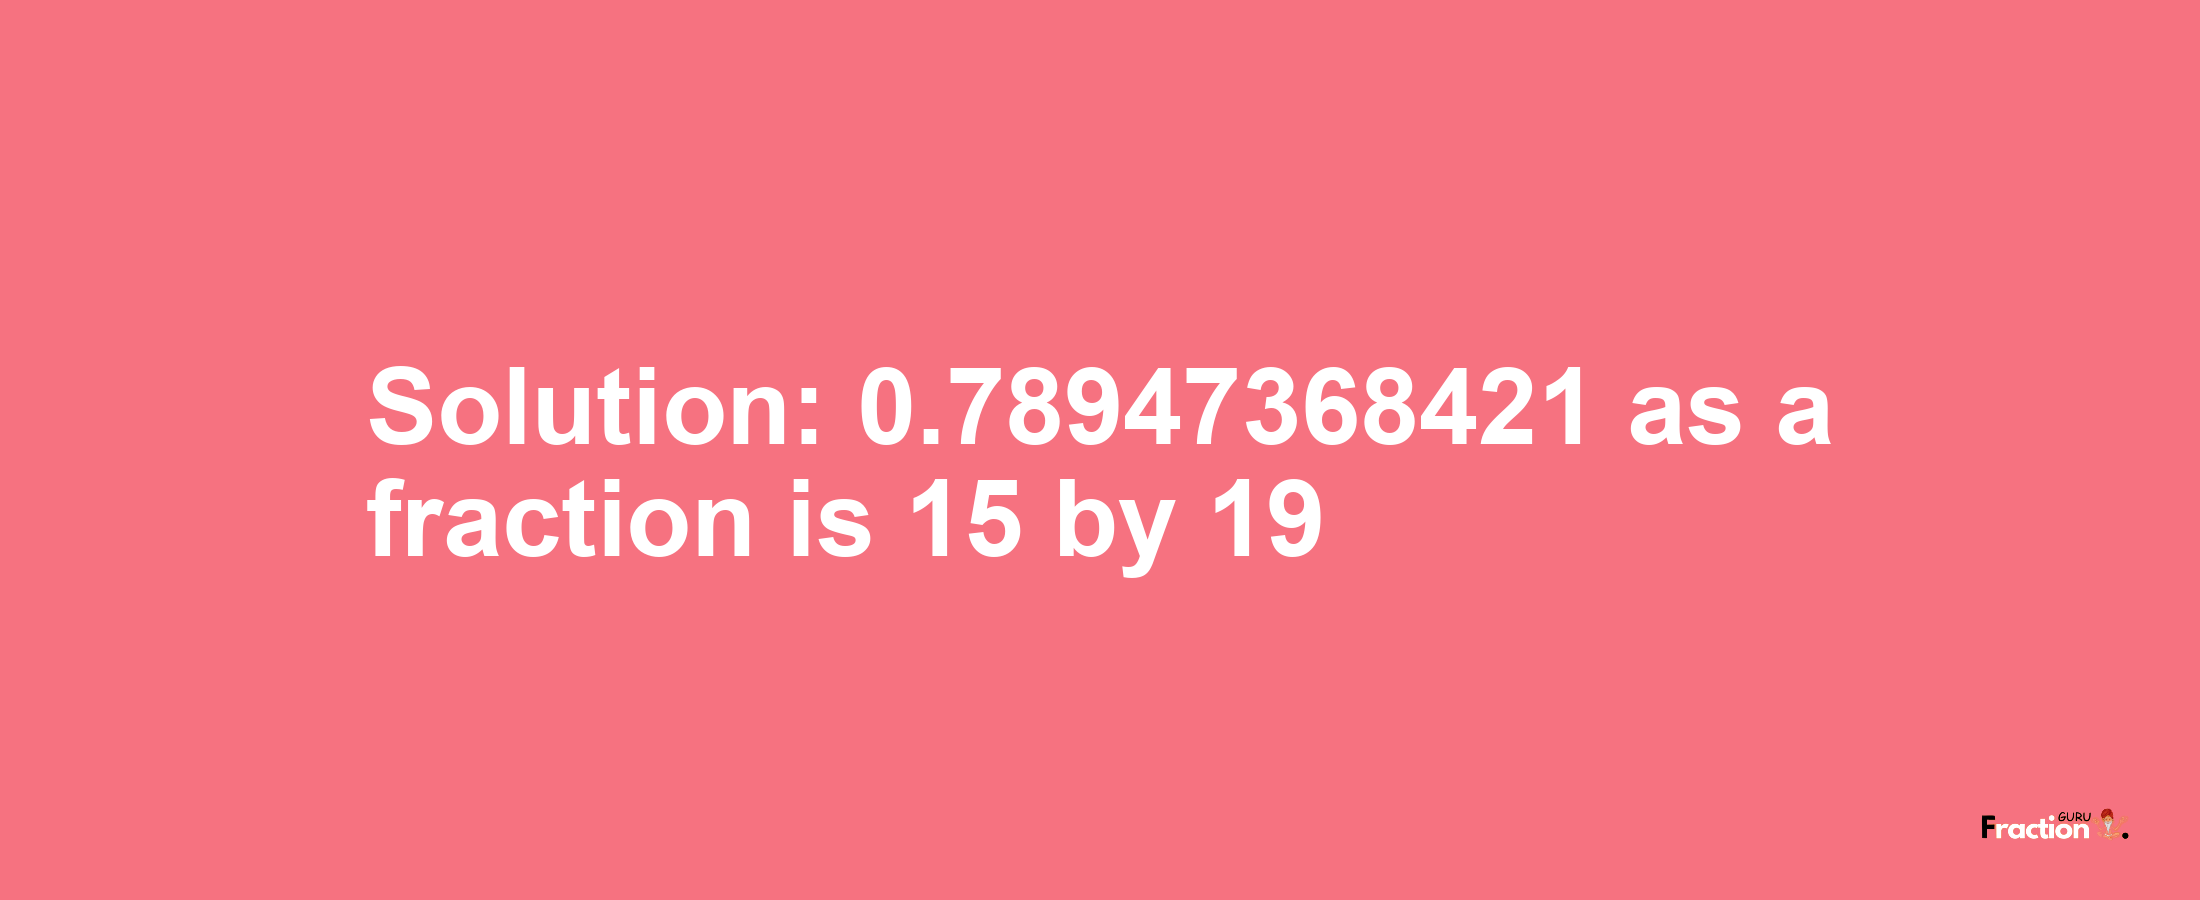 Solution:0.78947368421 as a fraction is 15/19